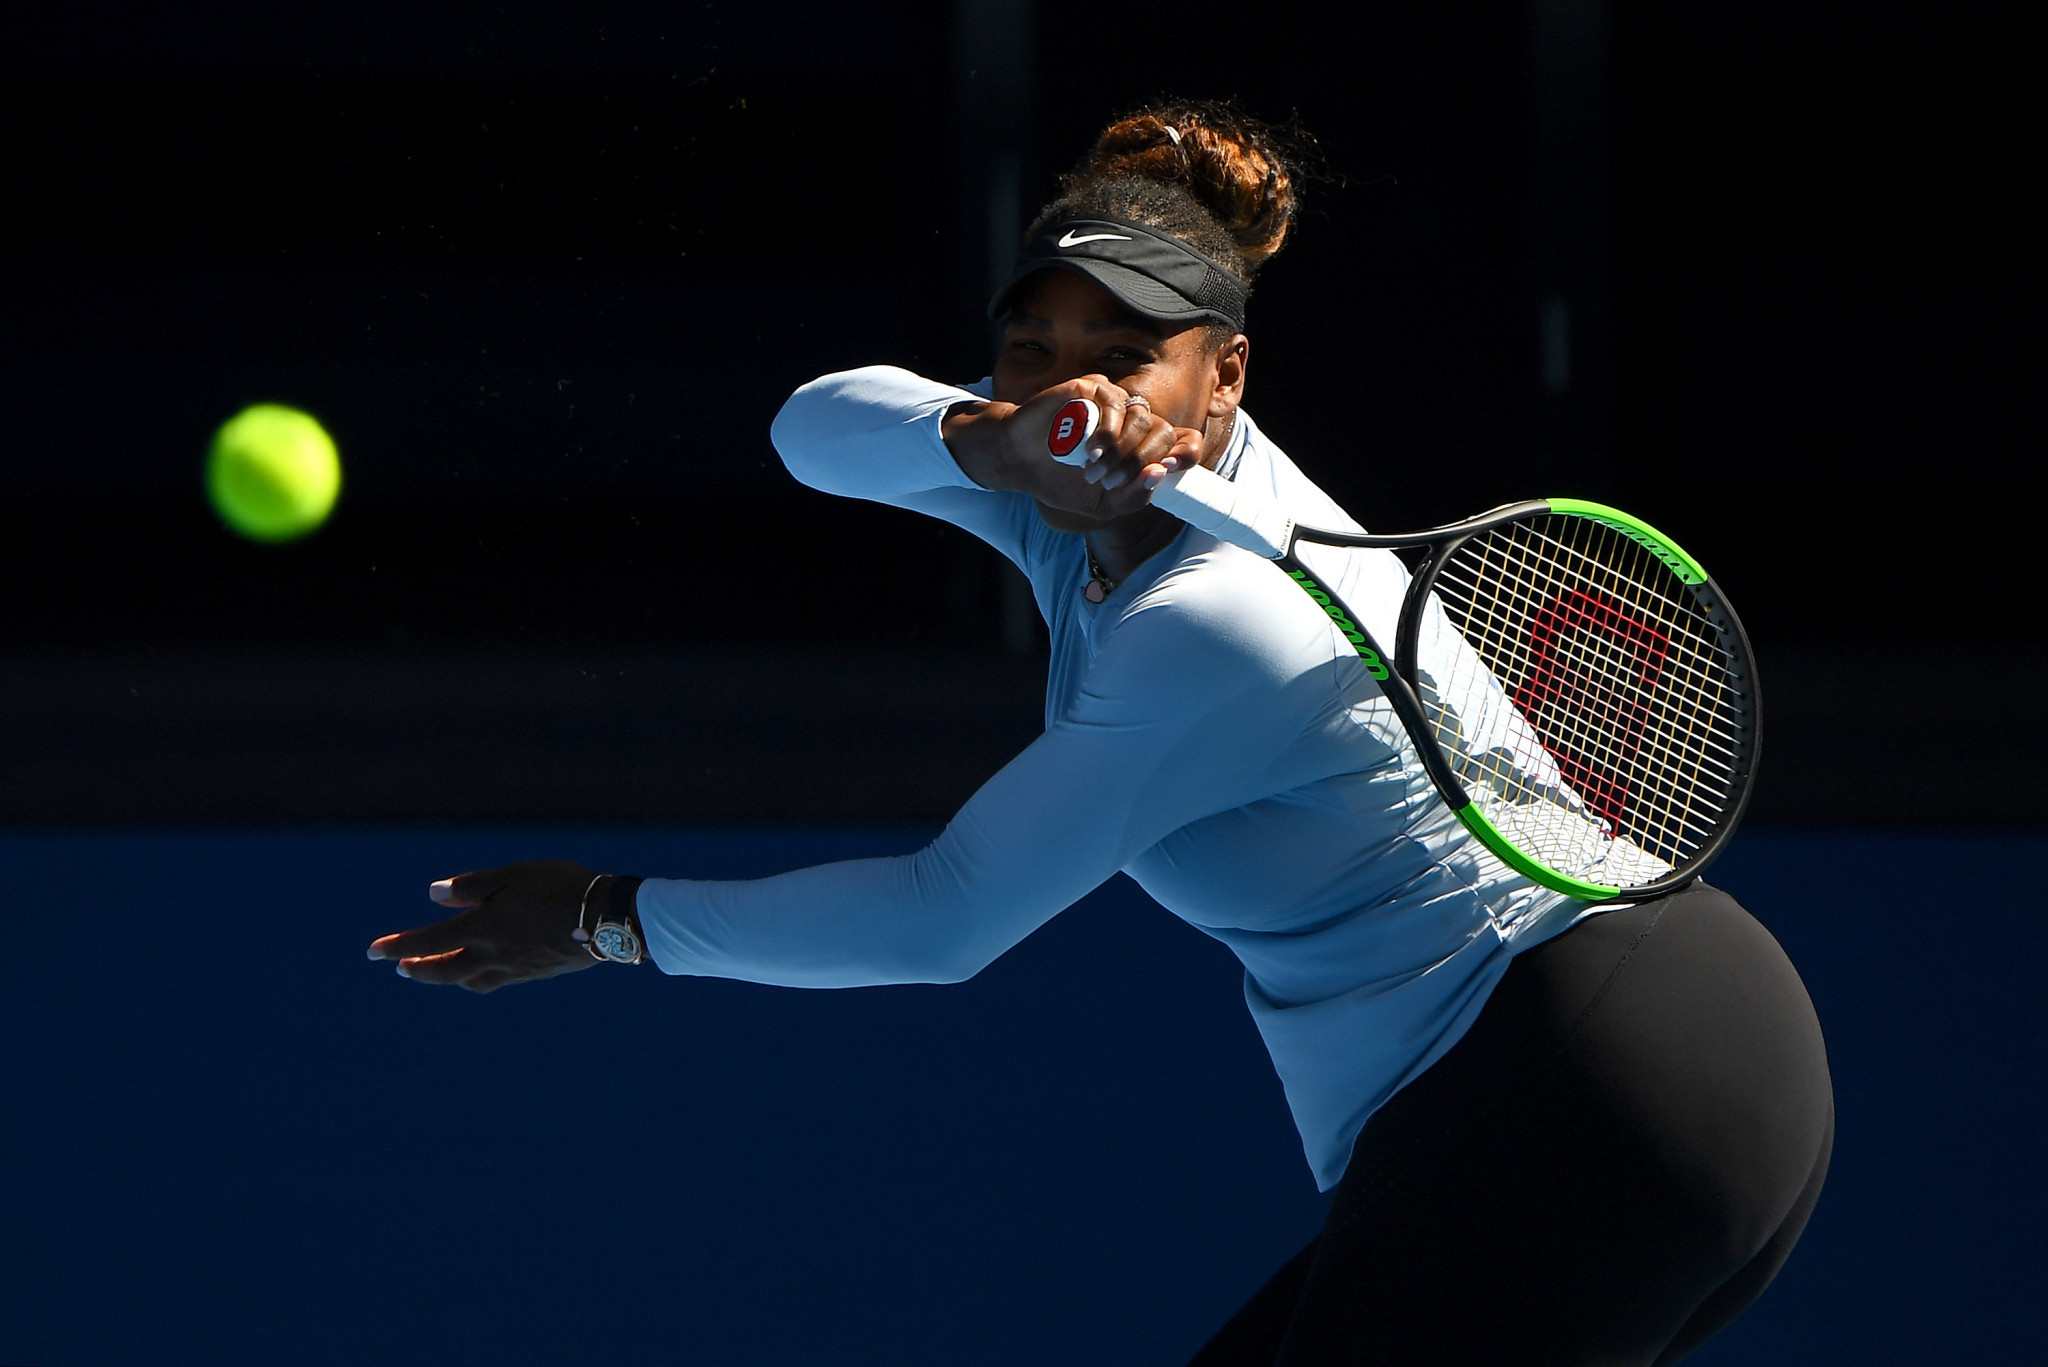 Serena Williams will aim for an eighth Australian Open title ©Getty Images